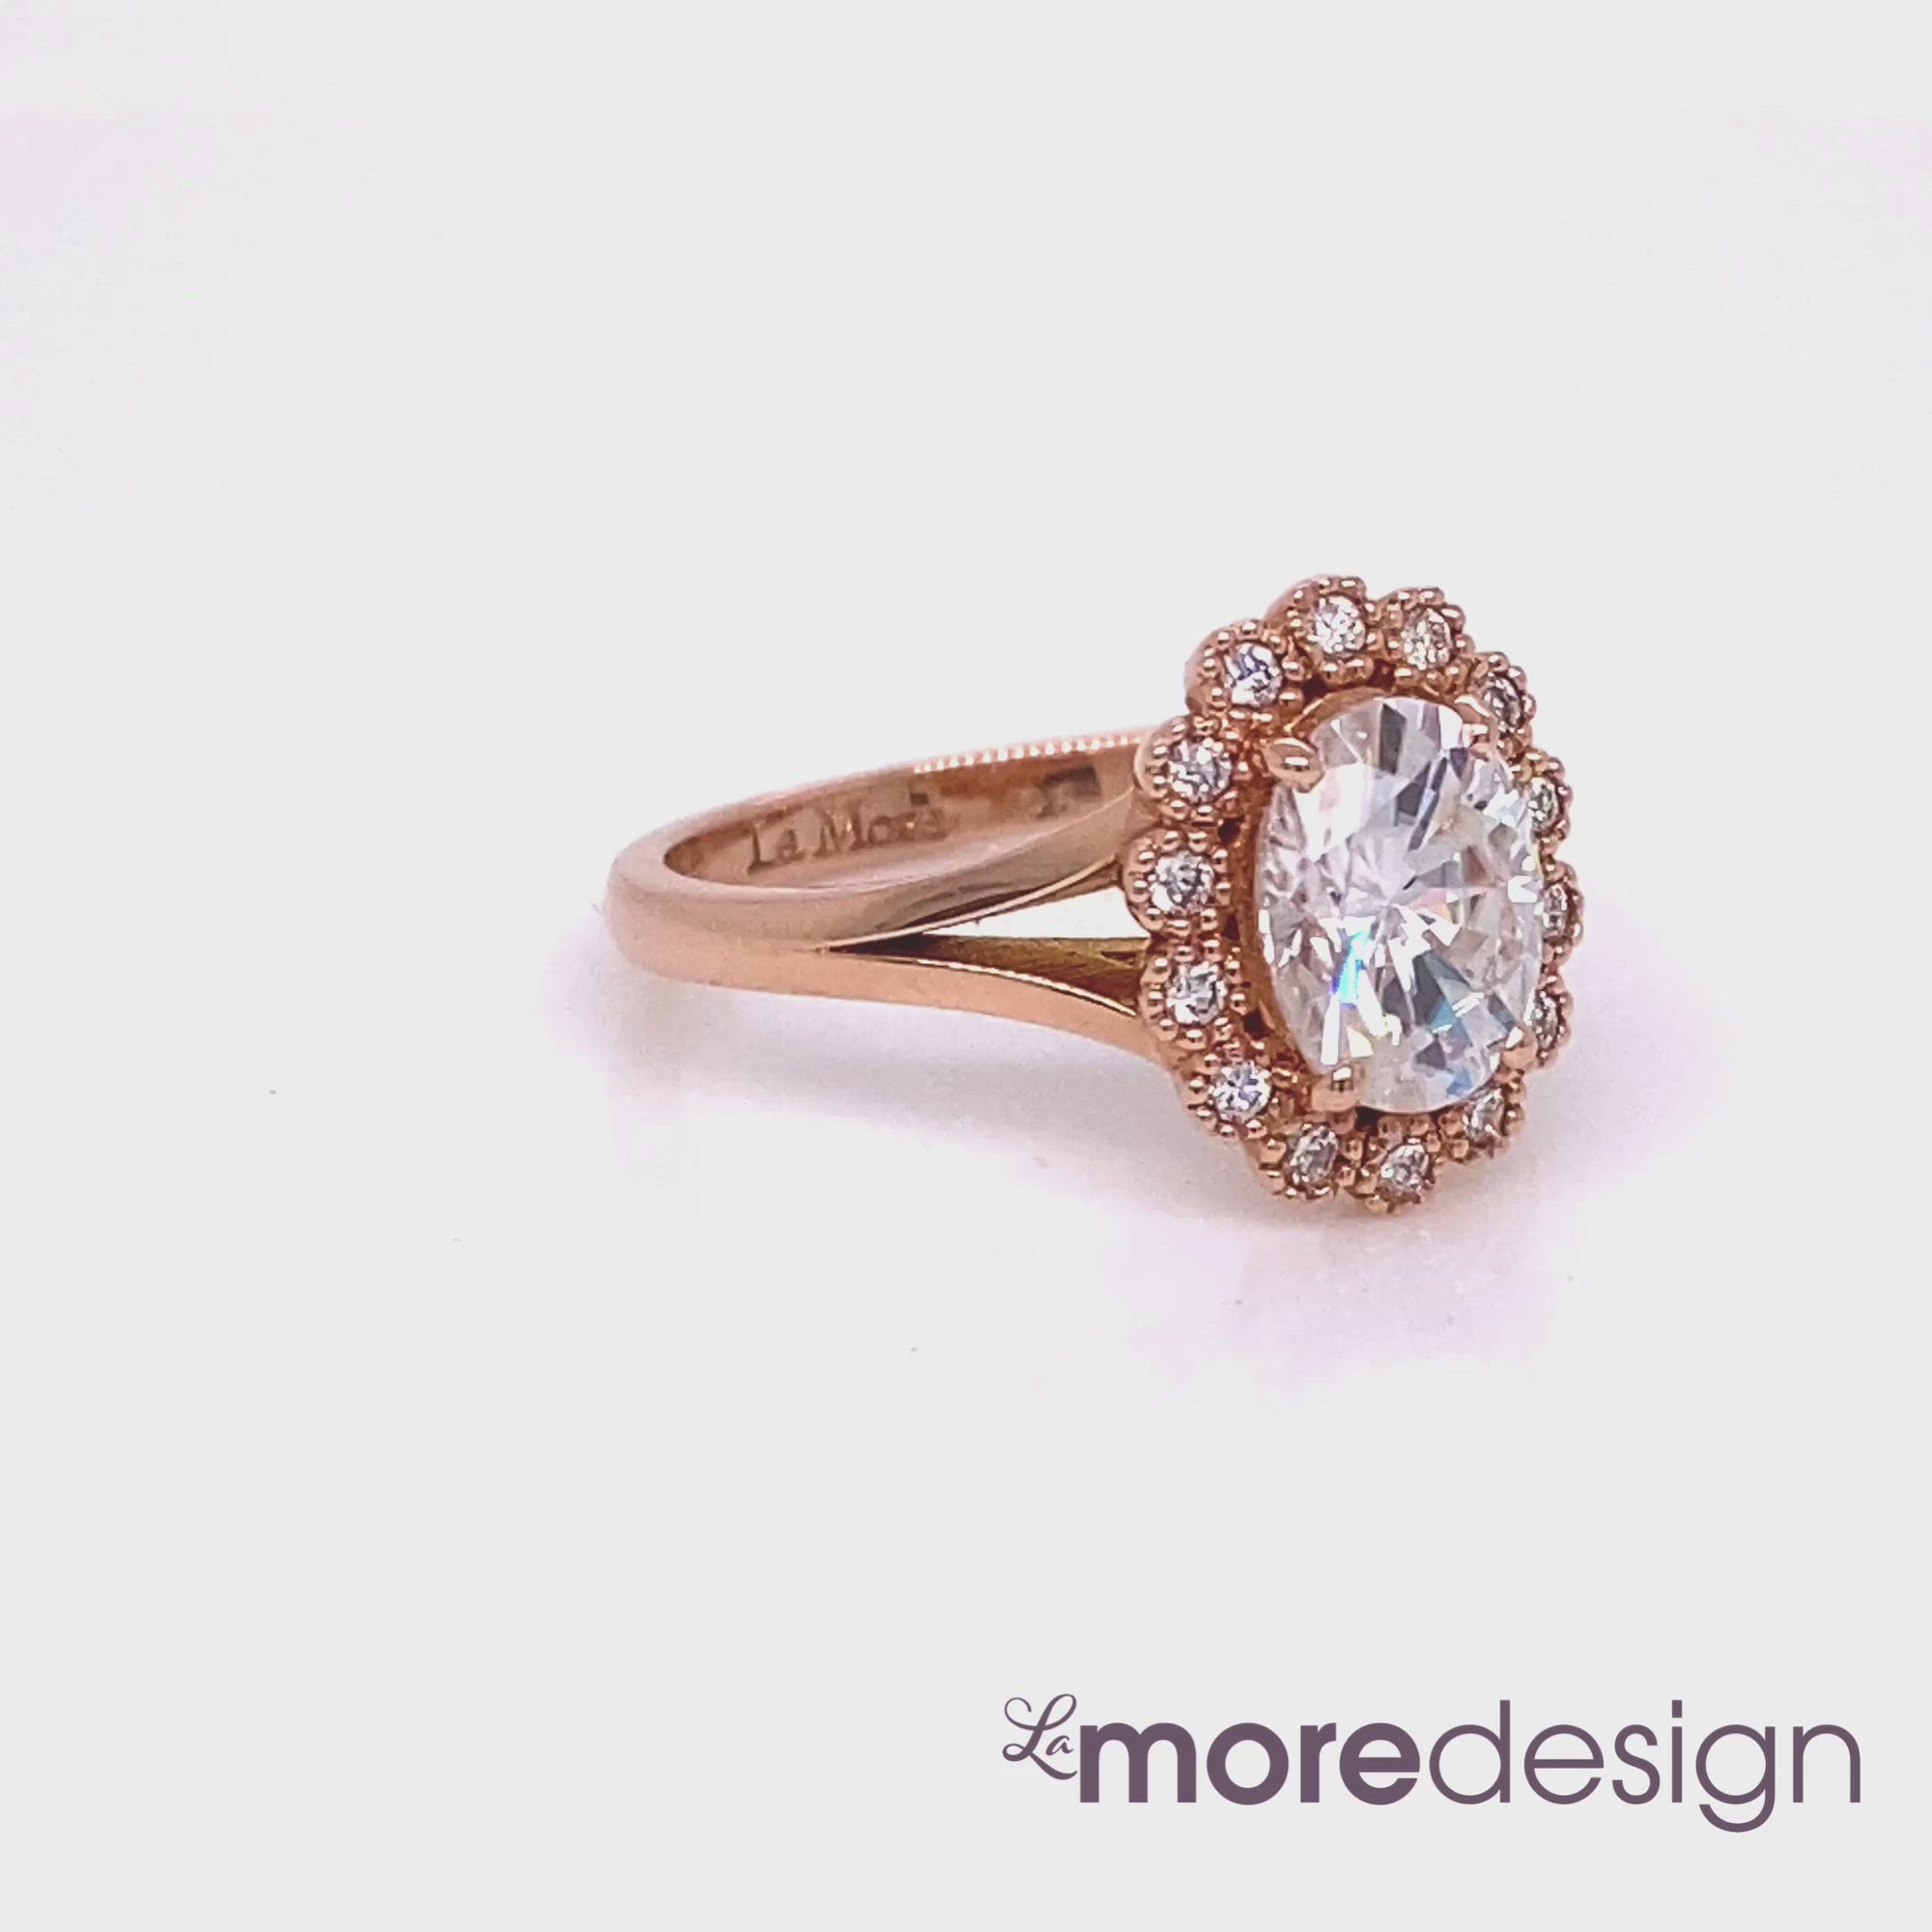 Vintage inspired engagement ring features an oval cut forever one moissnaite set in 14k rose gold milgrain halo diamond ring setting and is finished in split shank. The distinctive yet gorgeous look of this moissanite ring will make your engagement unforgettable! 